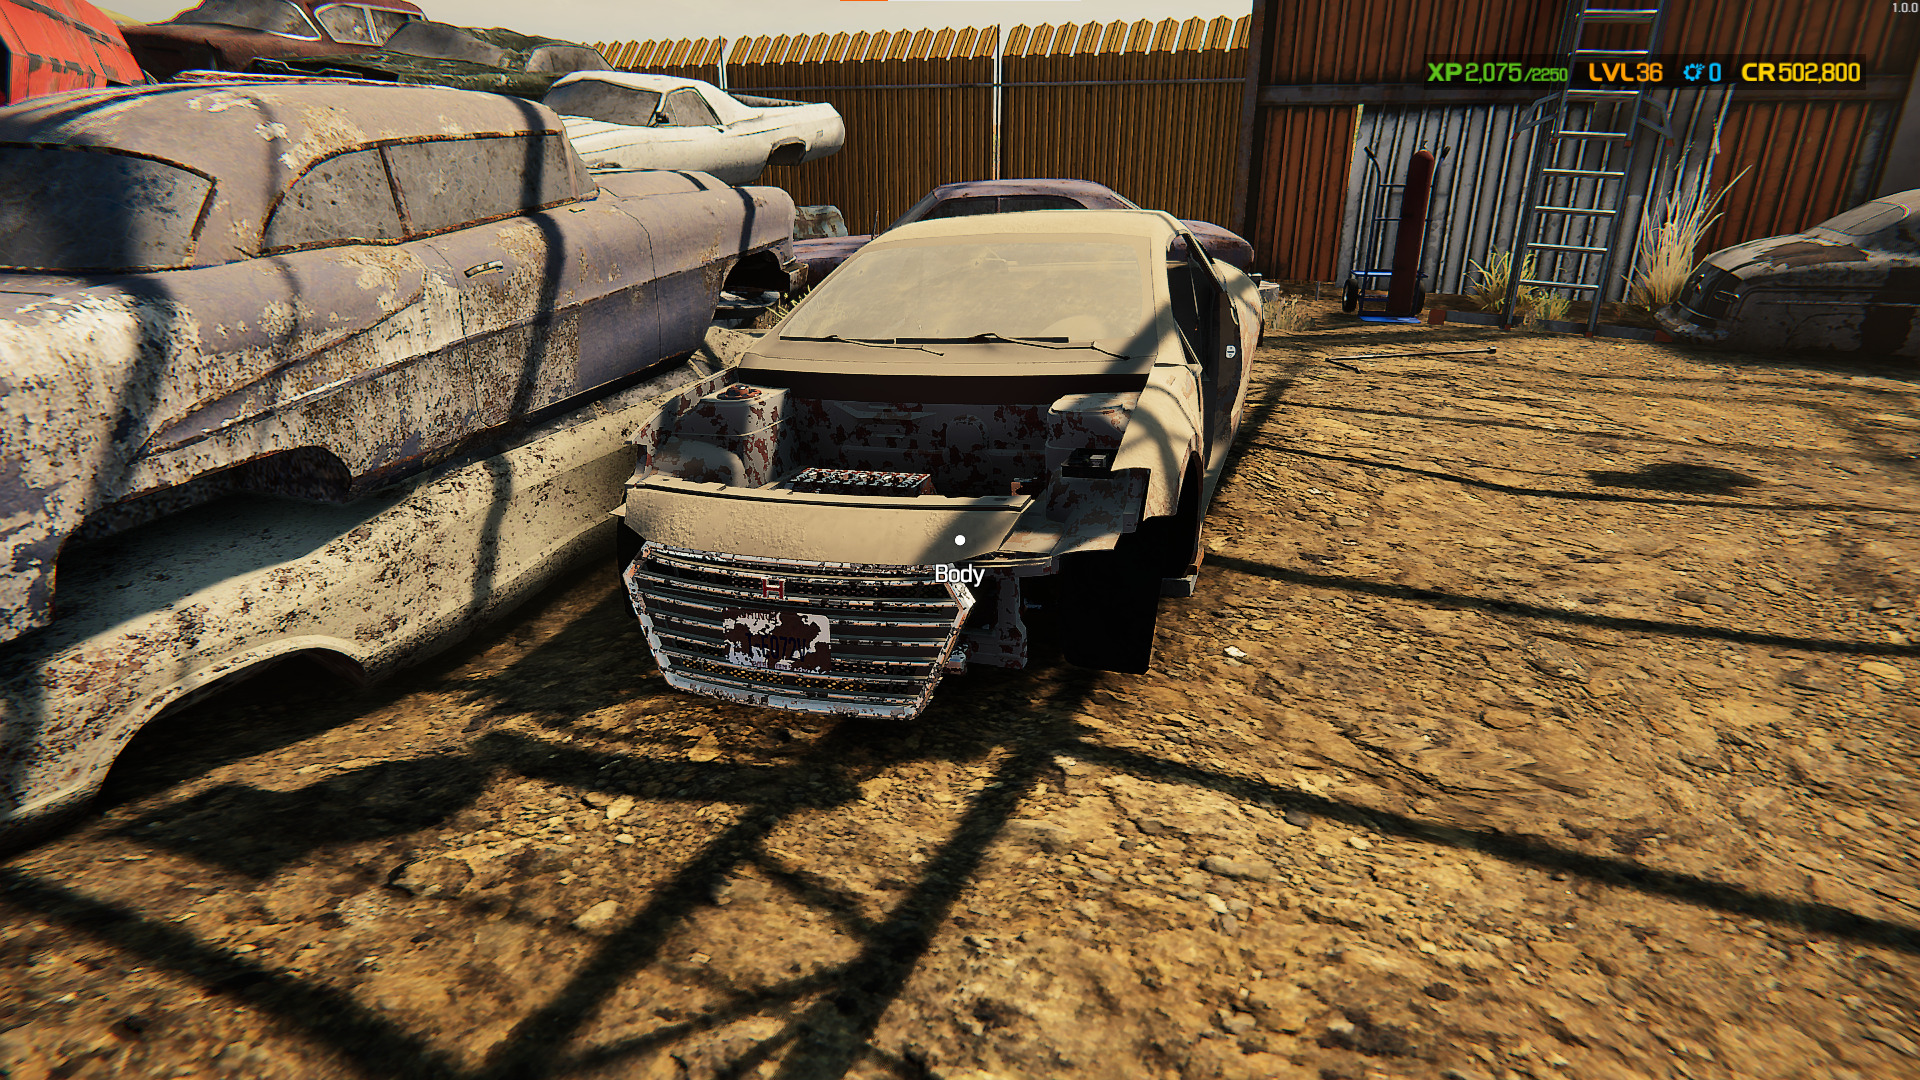 The Junkyard is a great place to buy cars for cheap in Car Mechanic Simulator. 